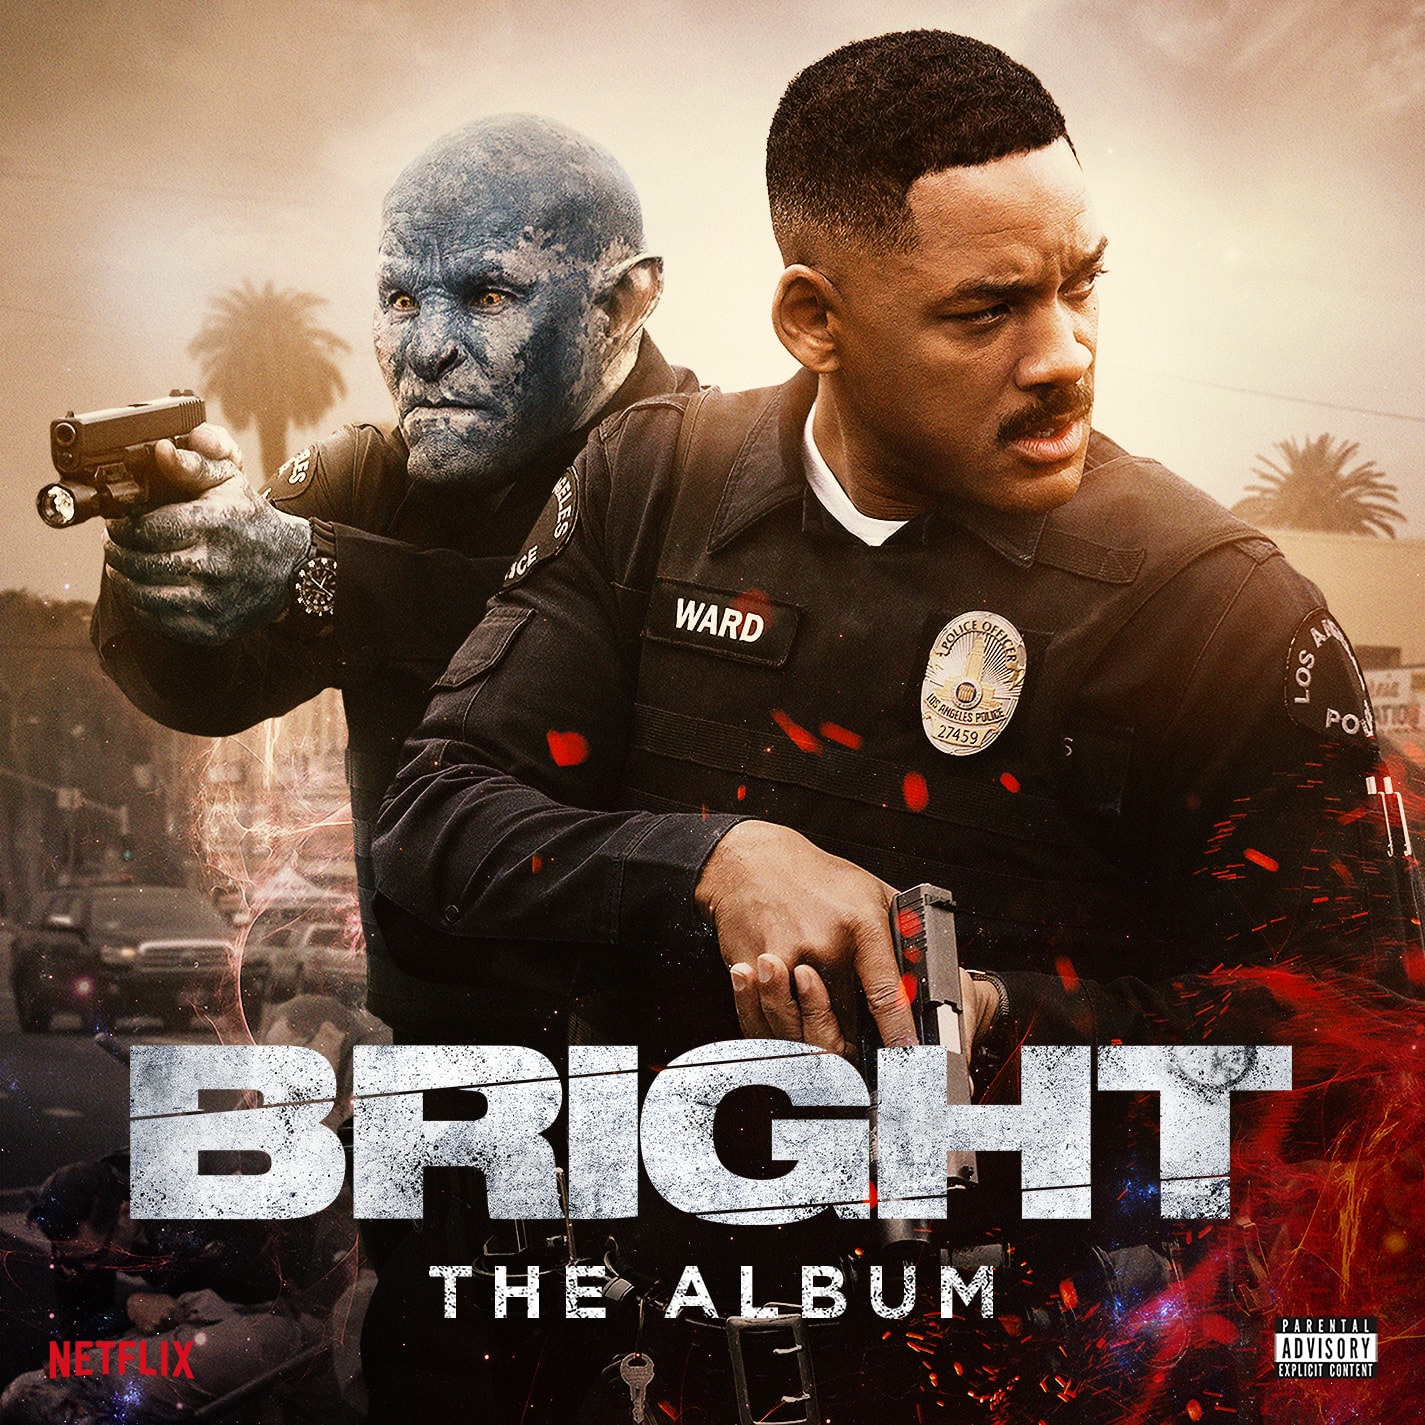 Bright: The Album Available Now